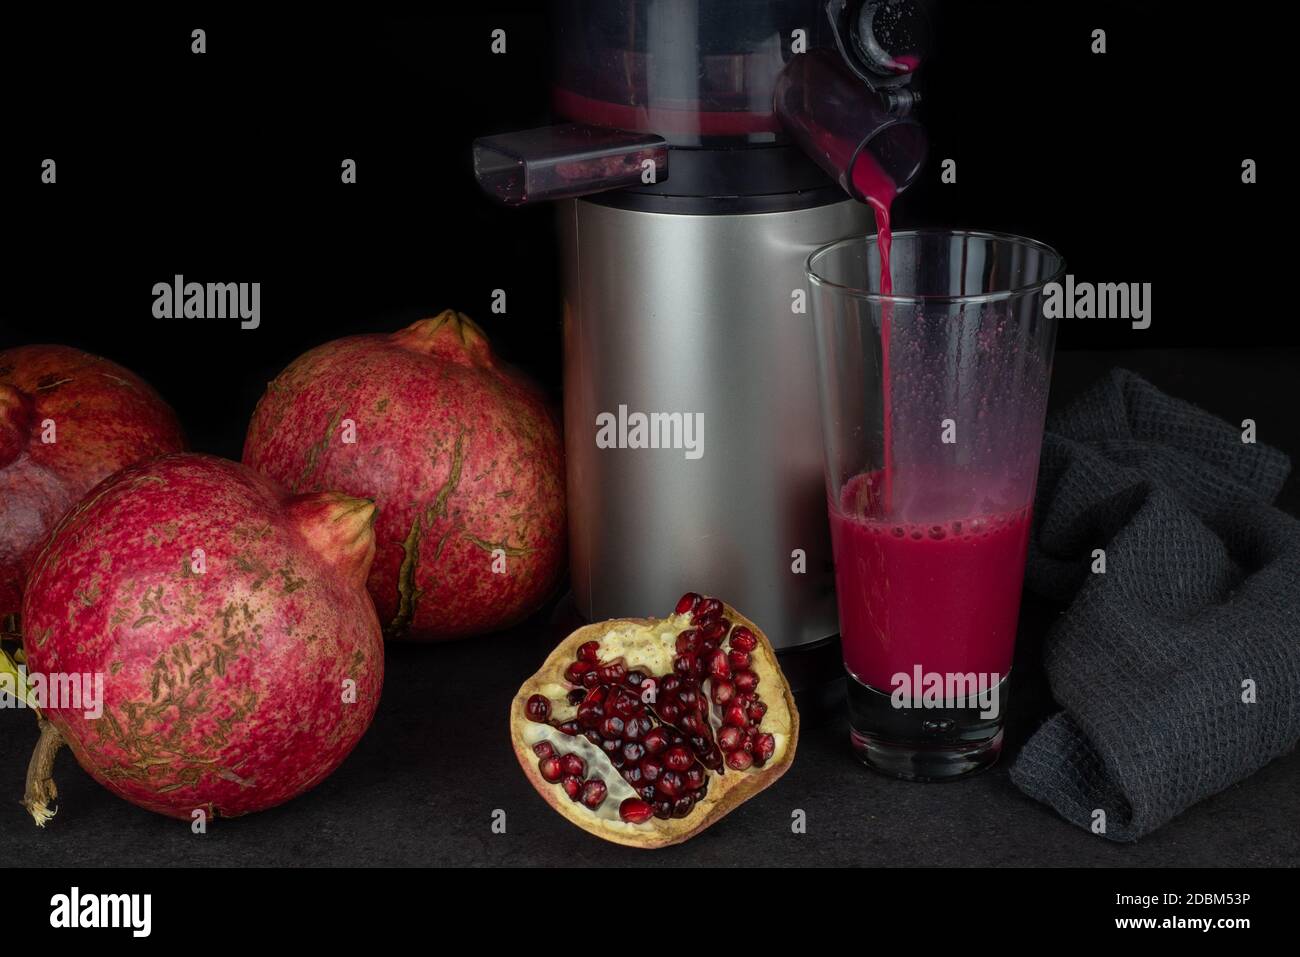 Juice extractor for healthy pomegranate juice. Healthy life concept Stock Photo